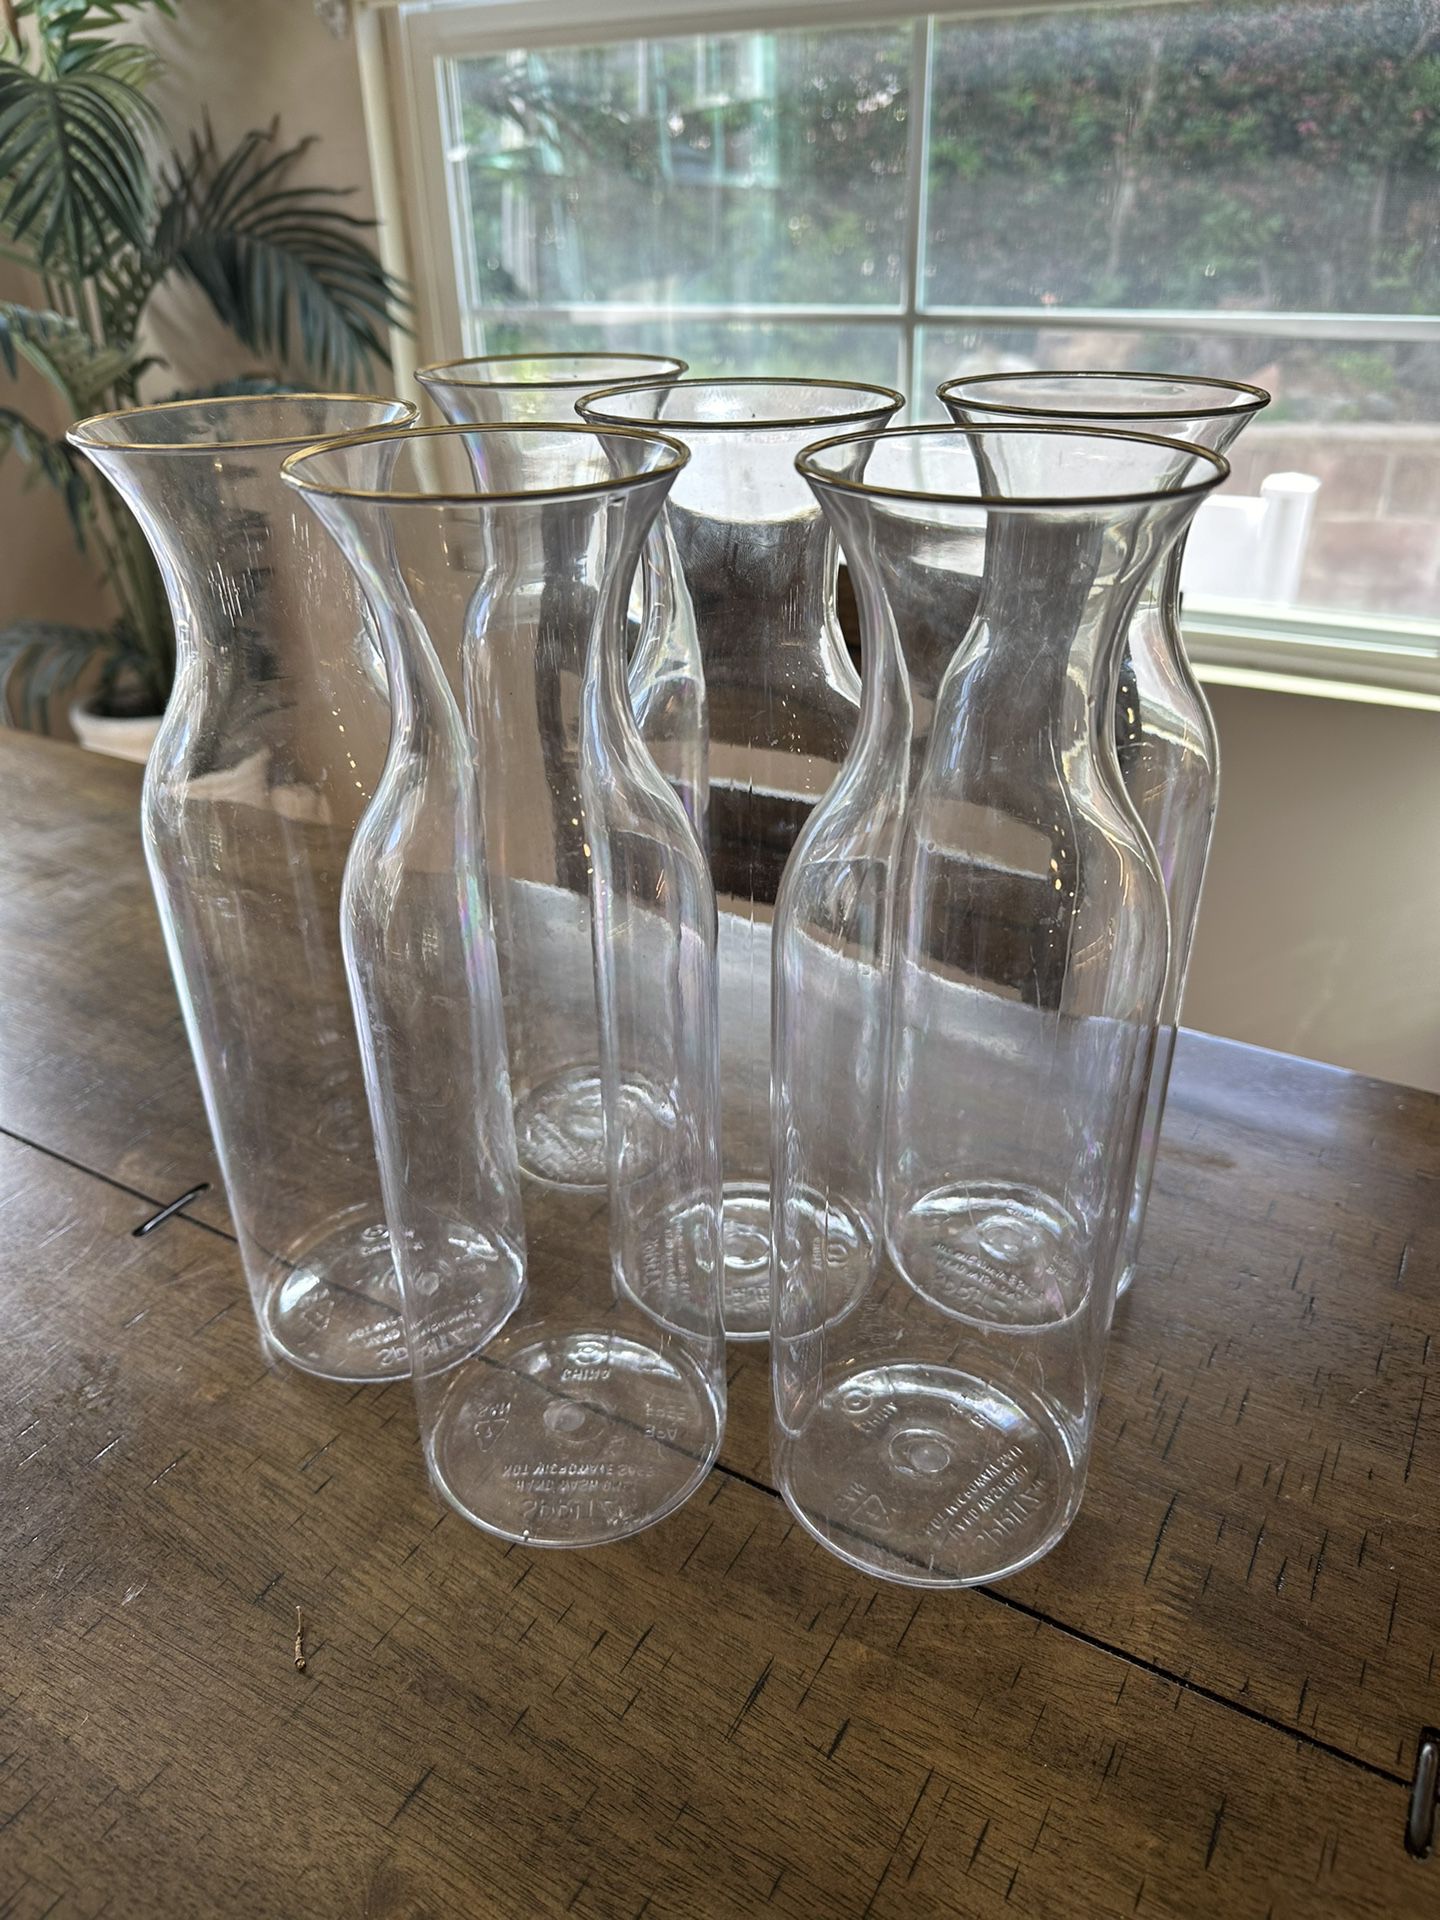 6 Acrylic Water Carafes